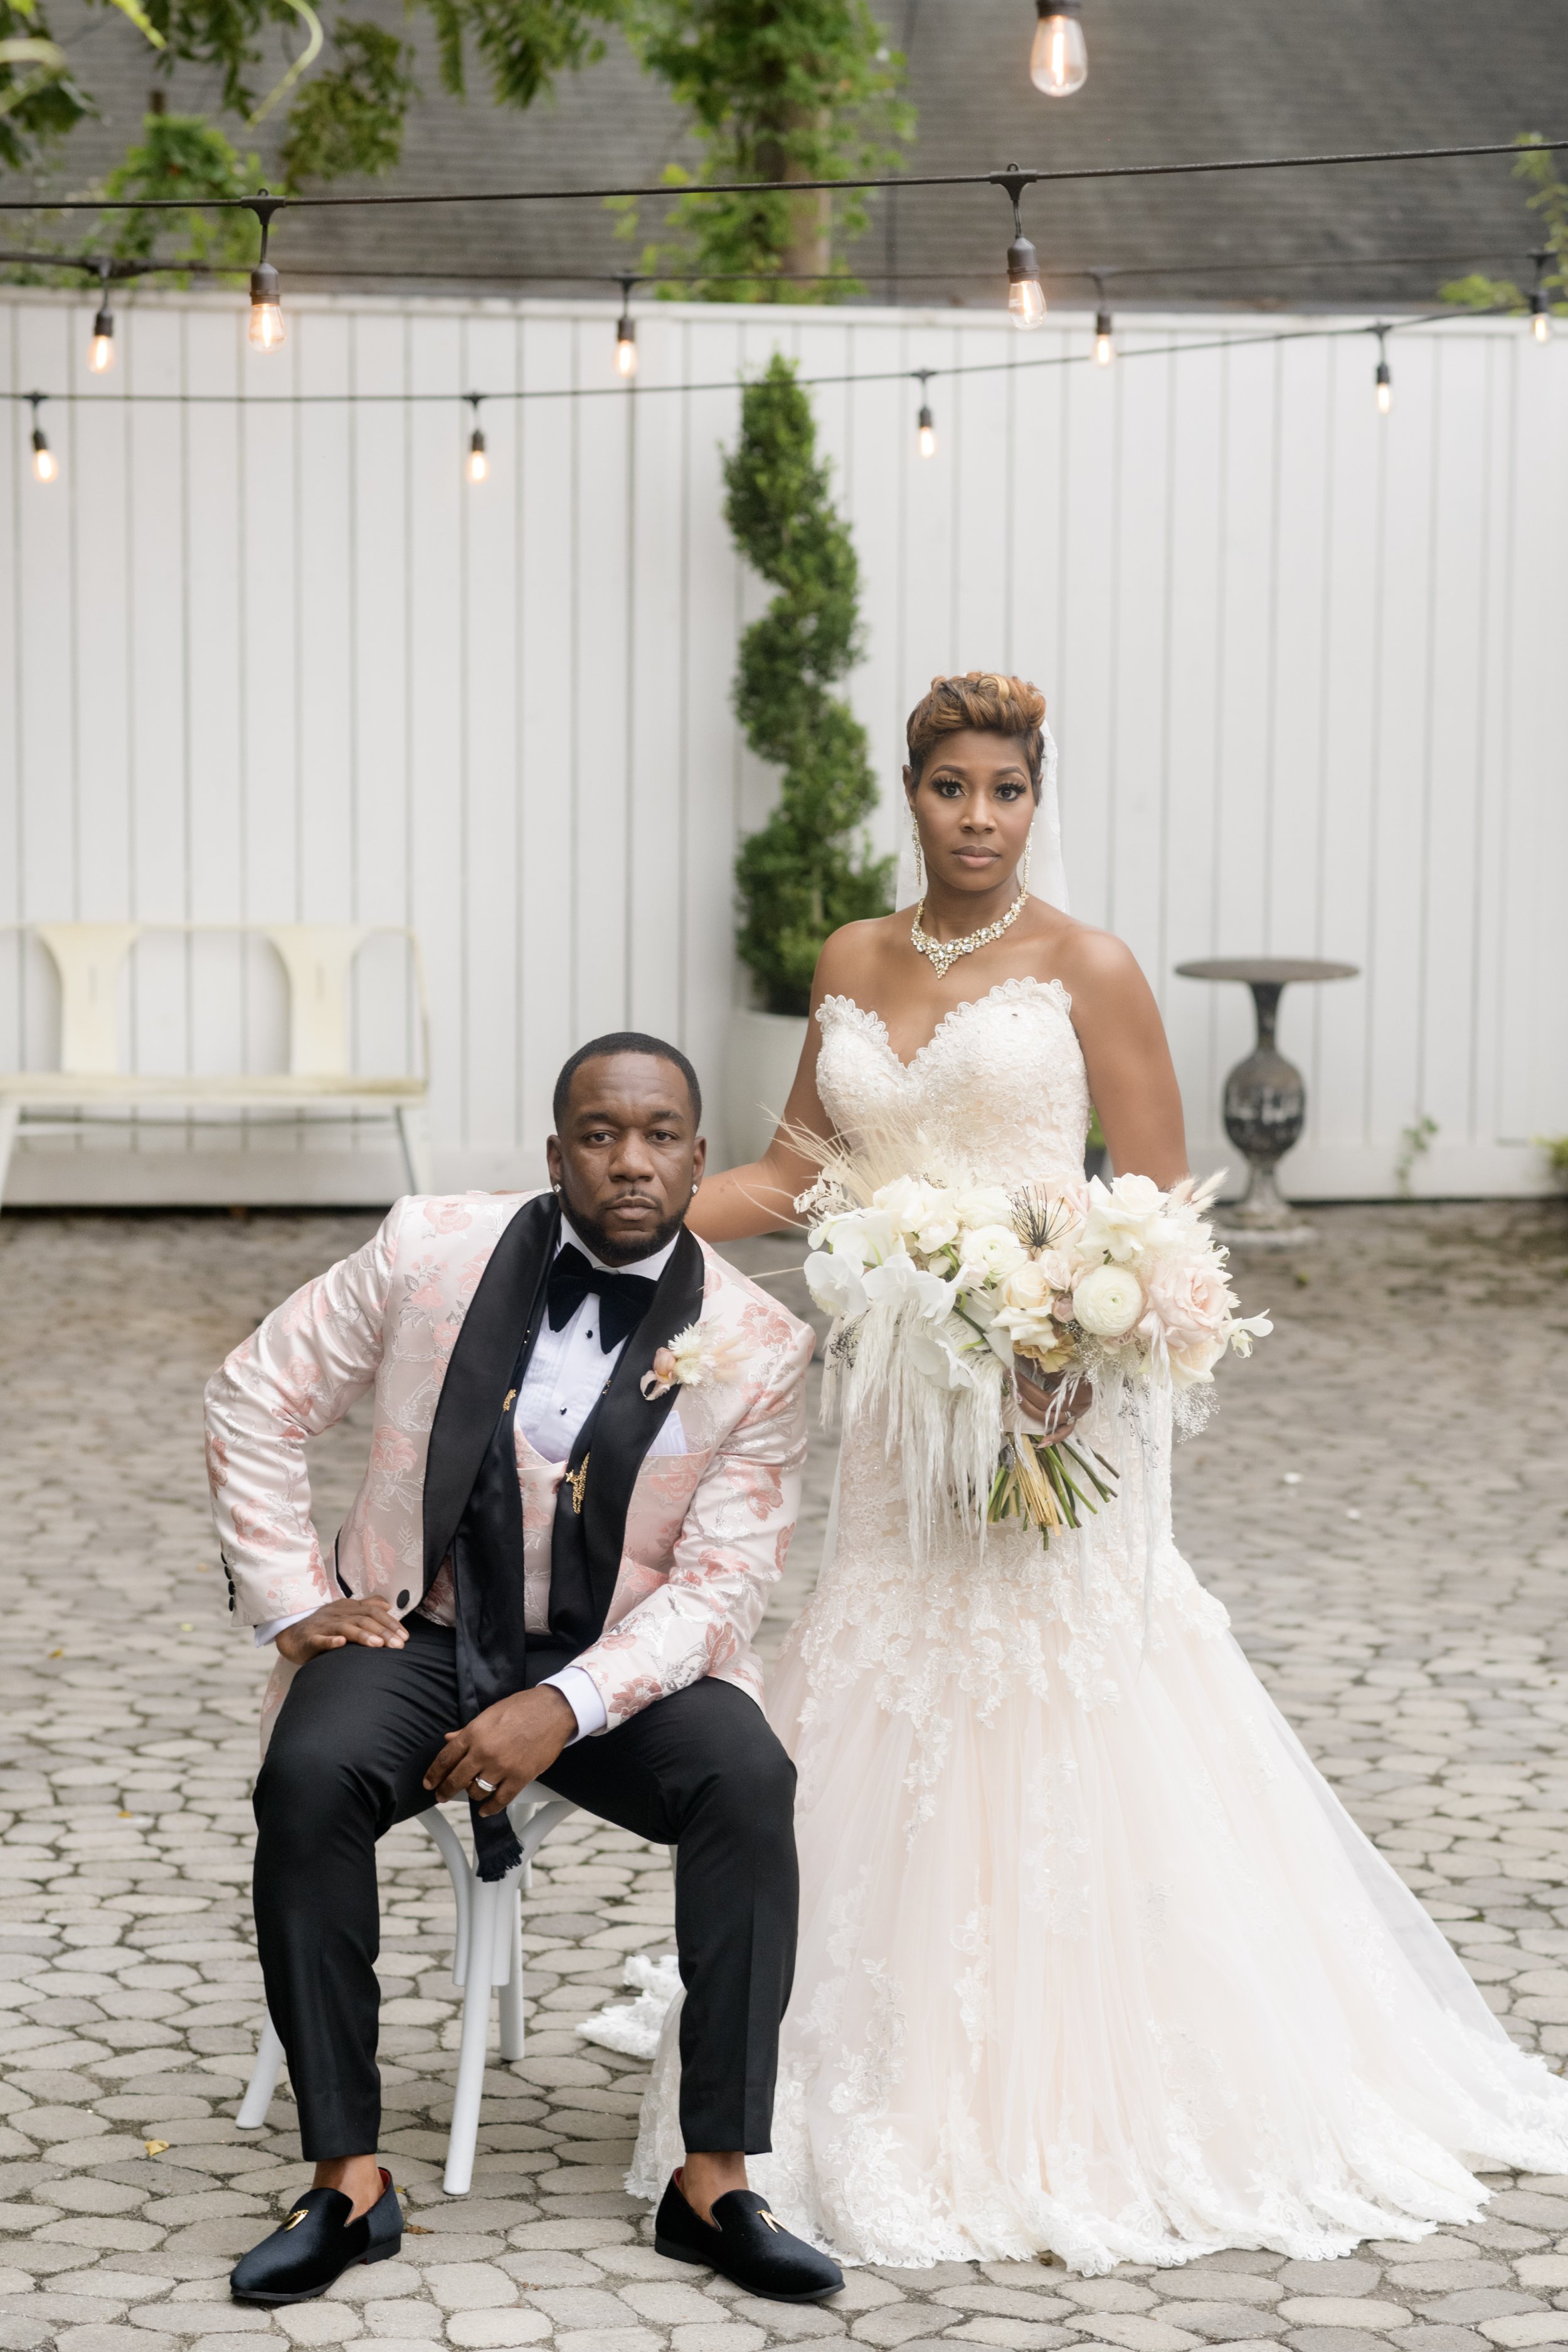 Newlywed Bride and Groom pose in the courtyard of their Atlanta wedding venue moments after being married